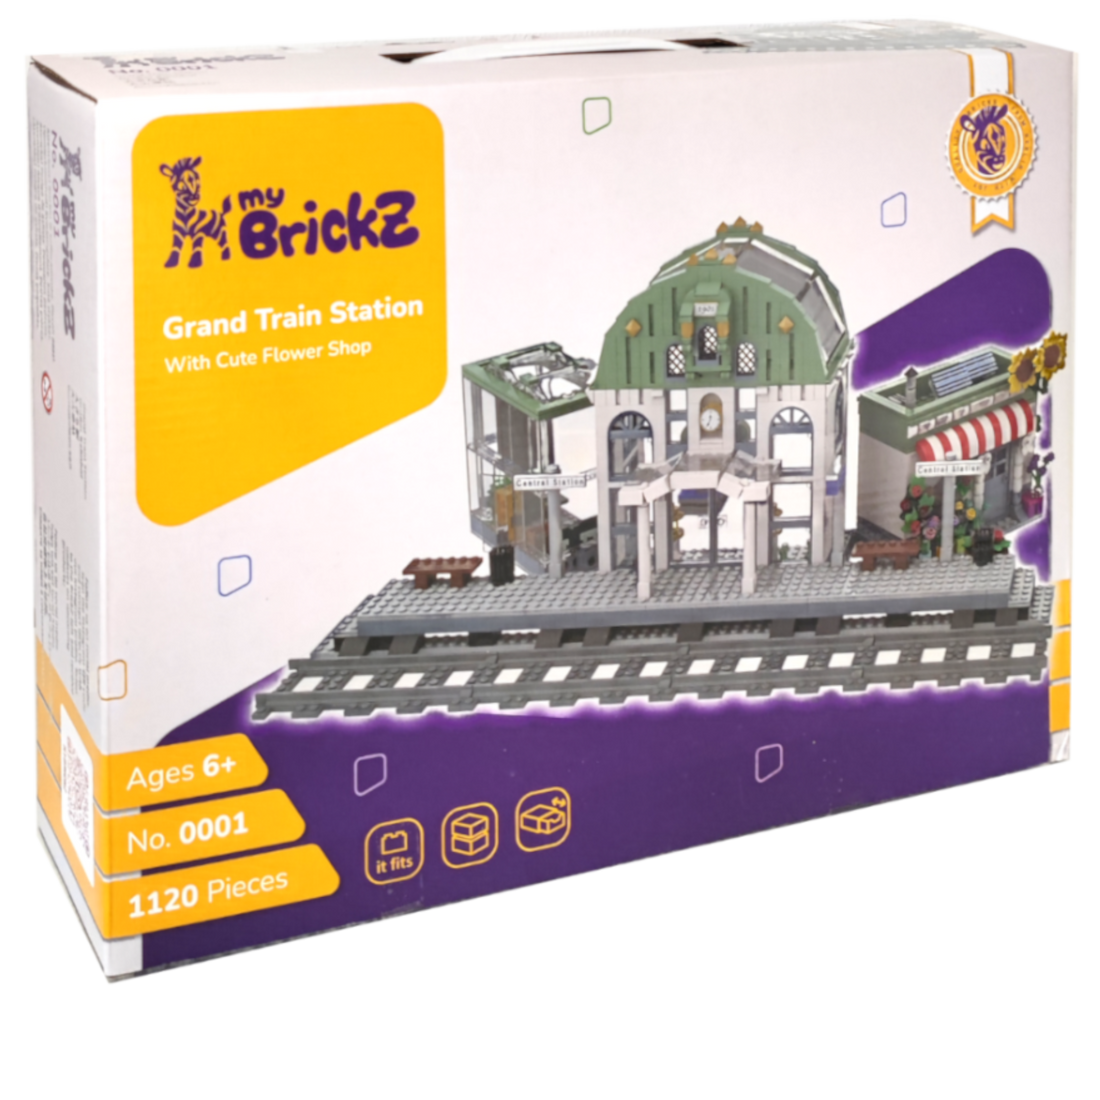 Discover the Charm of myBrickZ Large Train Station with Flower Shop - Set 0001